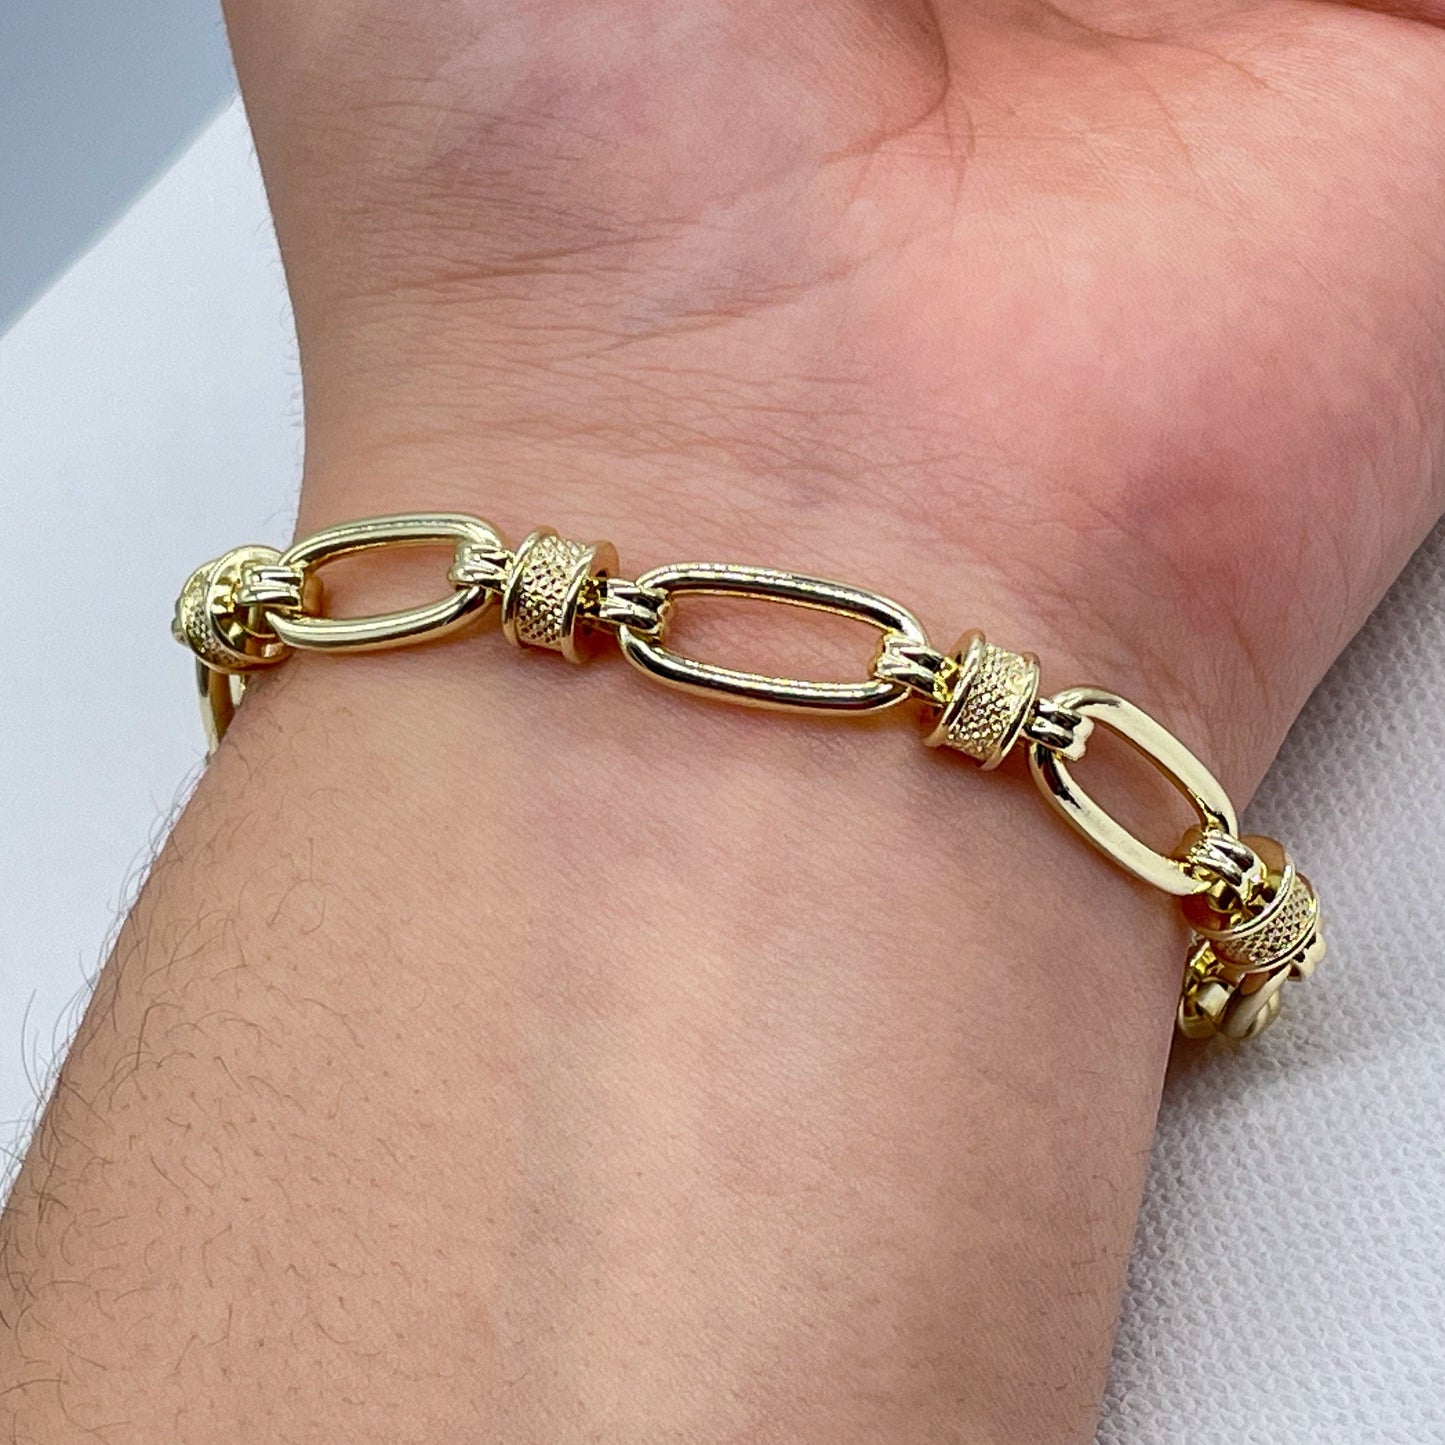 Chunky 18K Gold Layered Link Bracelet Featuring Plain Fancy Rondelle Donuts